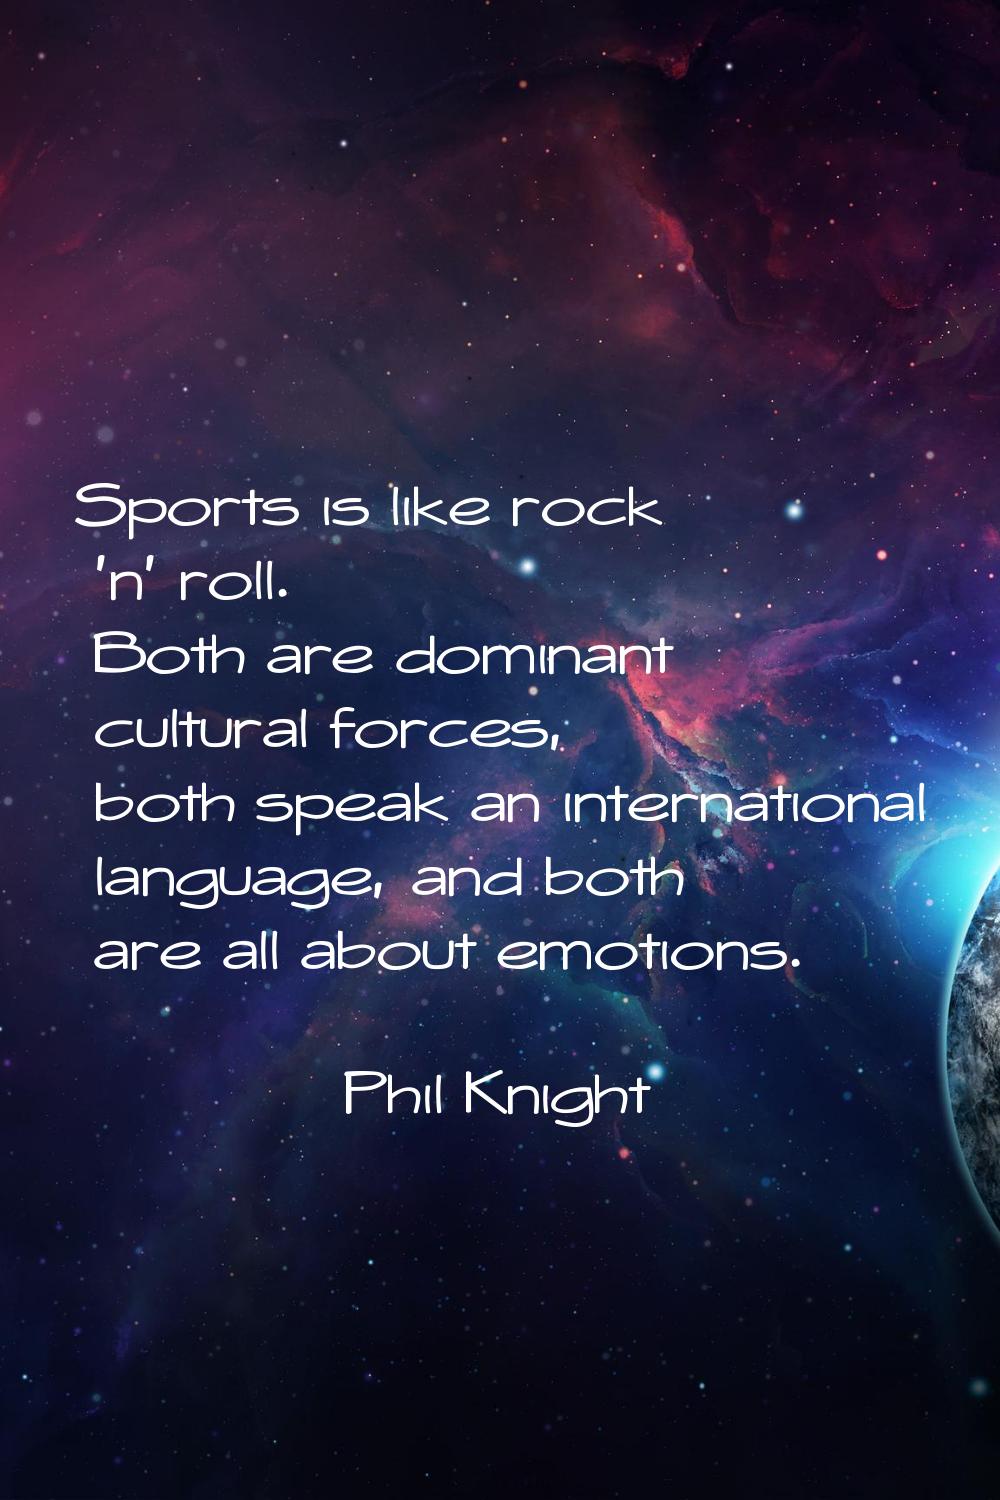 Sports is like rock 'n' roll. Both are dominant cultural forces, both speak an international langua